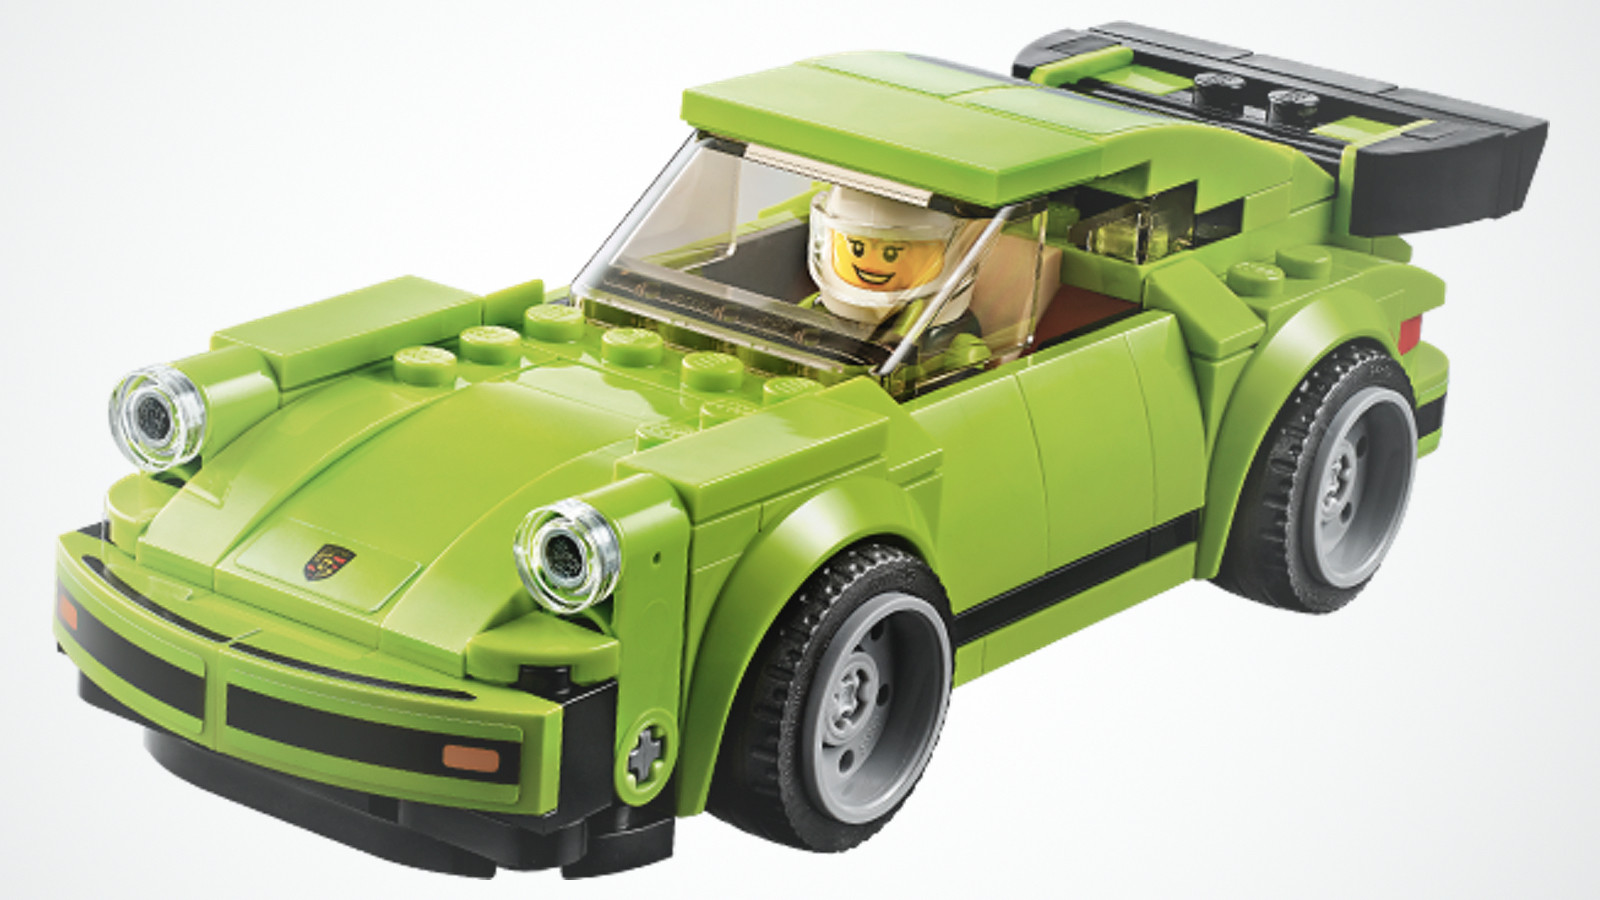 8 of our favourite Lego classic car kits